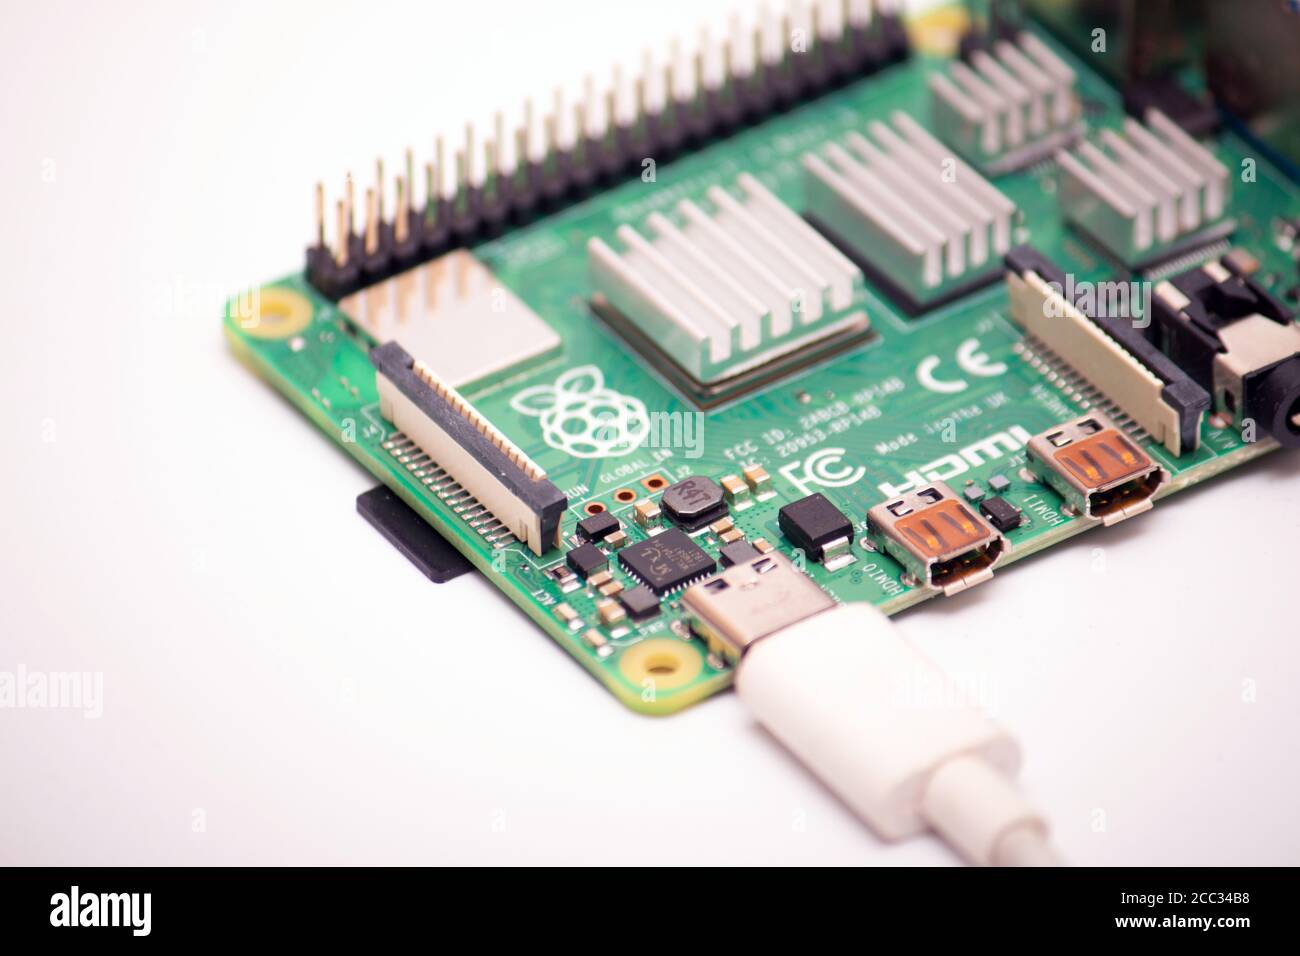 Kiev, Ukraine - August 13th, 2020: Connected to power supply by USB 3.0  type C cord SBC budget micro computer Raspberry Pi 4B. Isolated photo of  RPI4B Stock Photo - Alamy